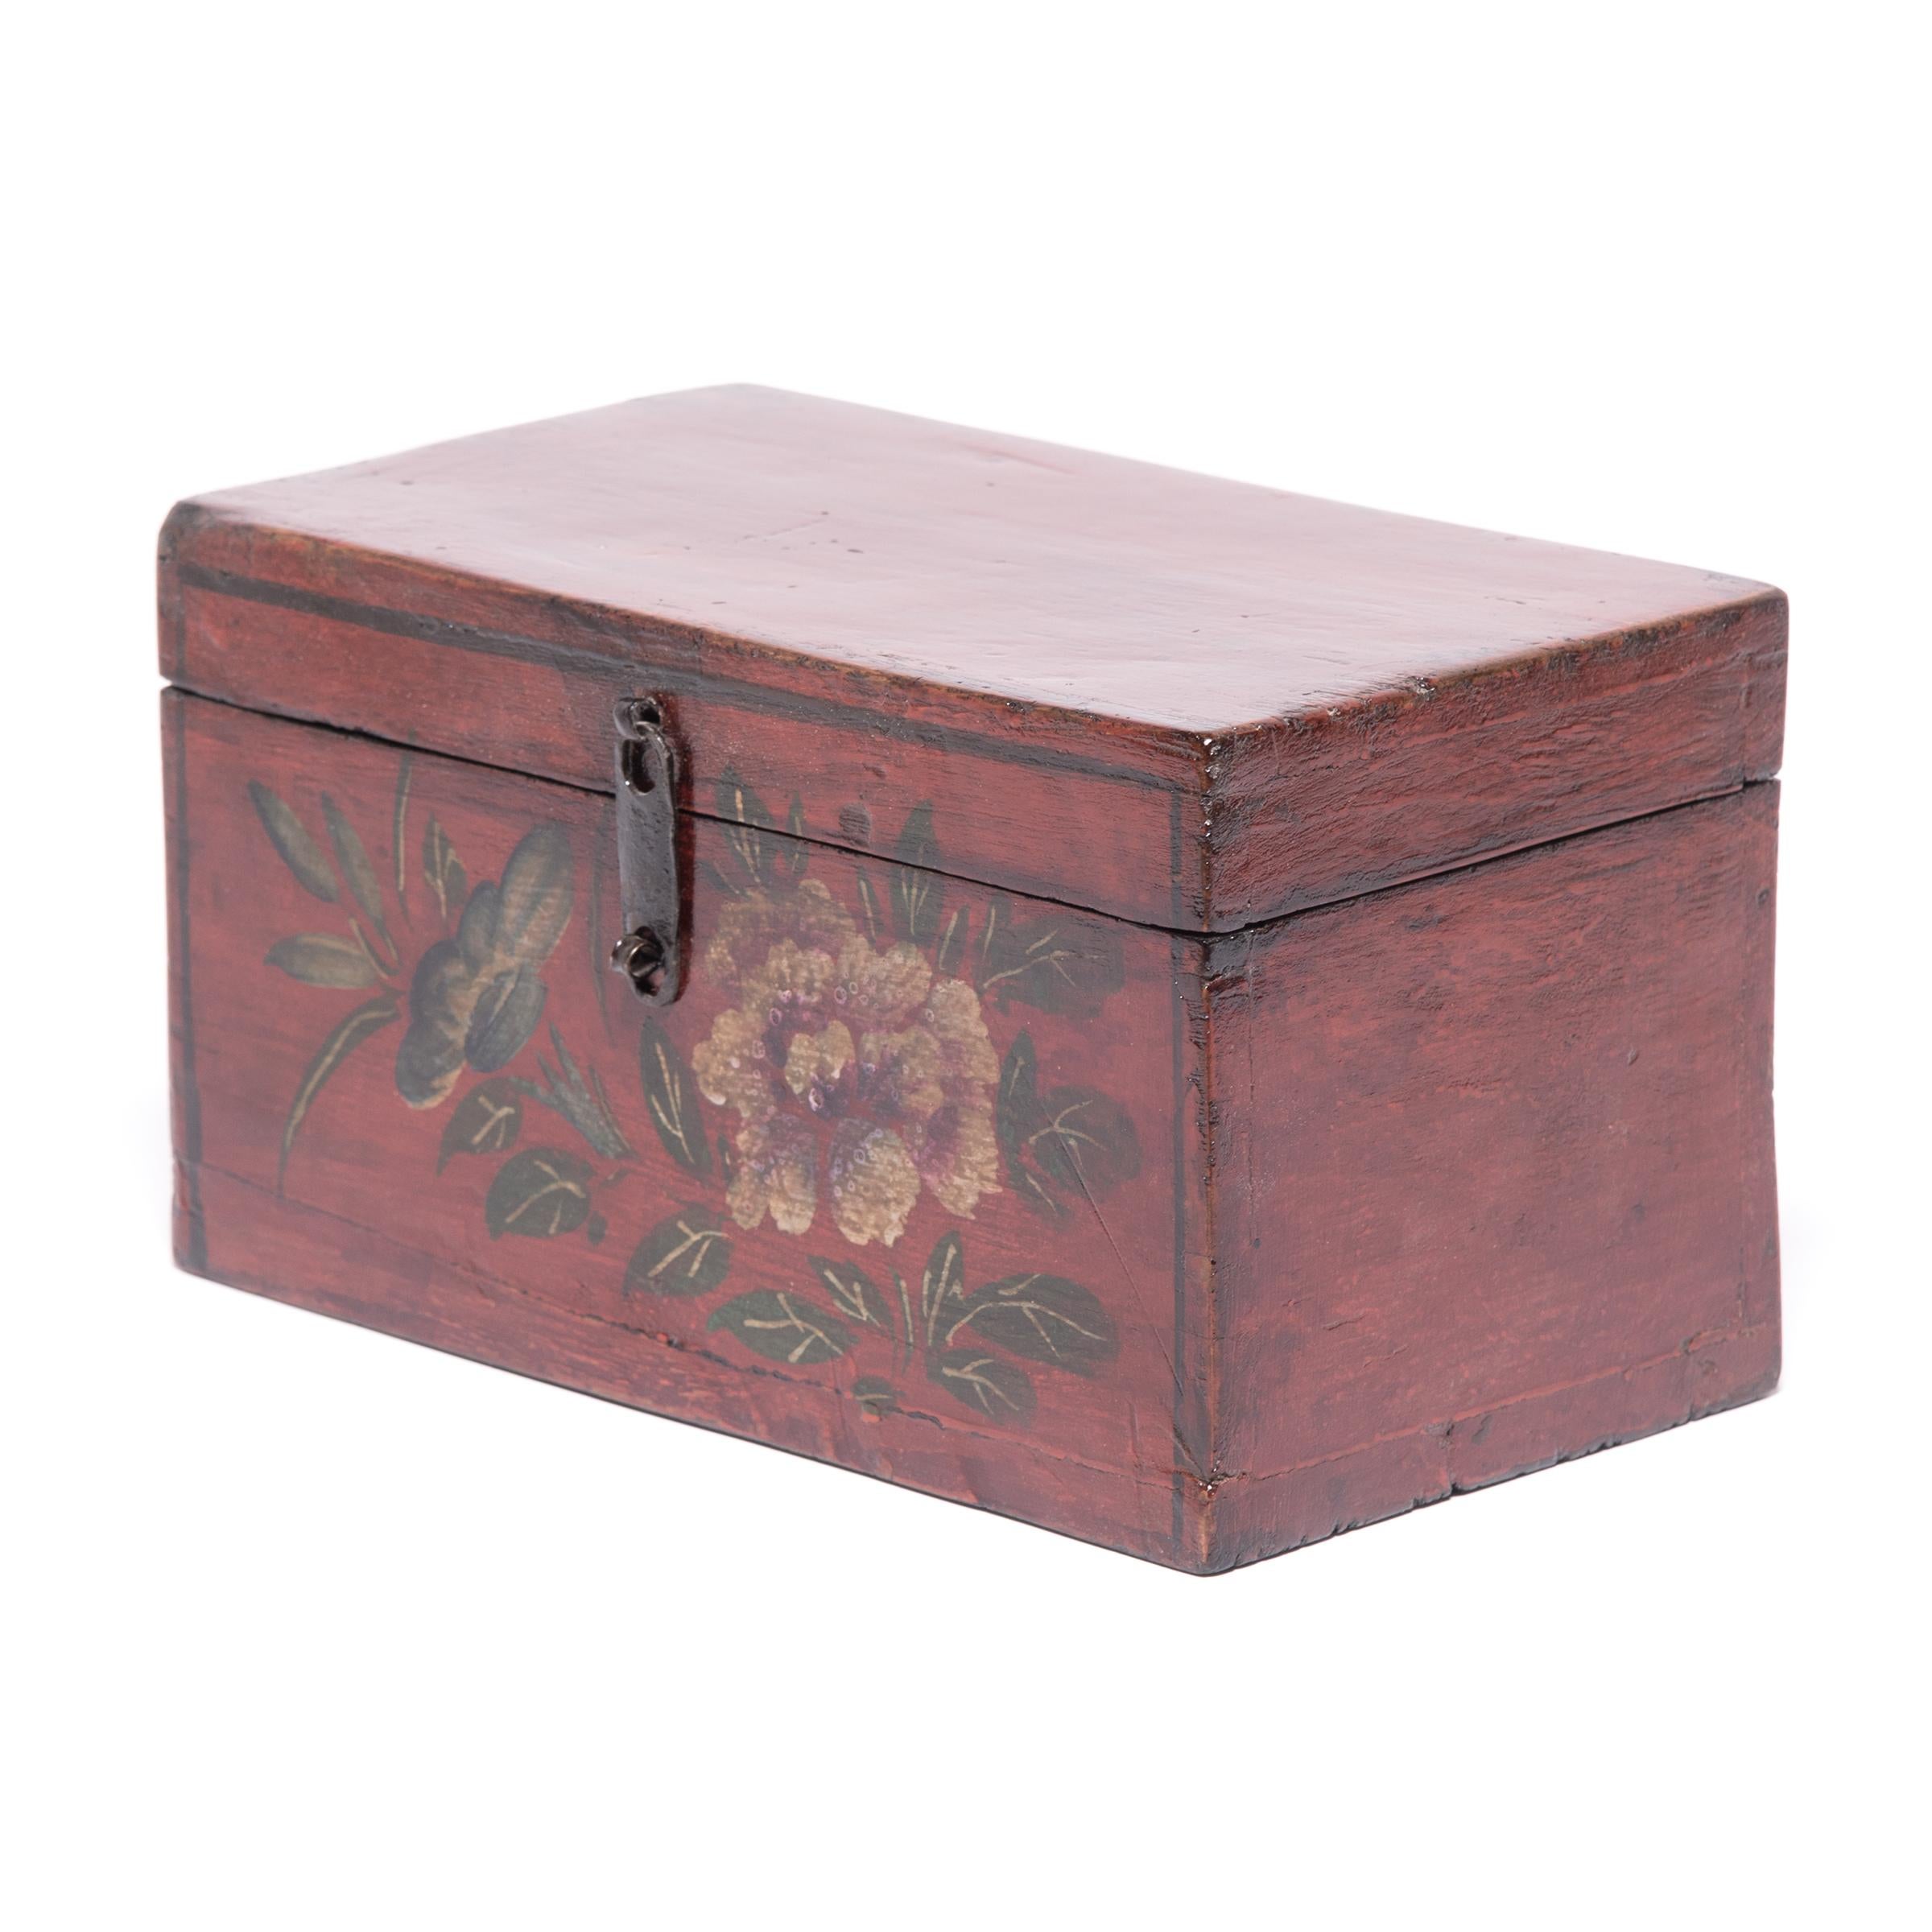 Made of humble pine, this simple box was transformed by coats of rich lacquer and decorative painted motifs to become a fitting container for treasured objects. Crafted in the early 20th century, this treasure box is adorned with a blossoming peony,